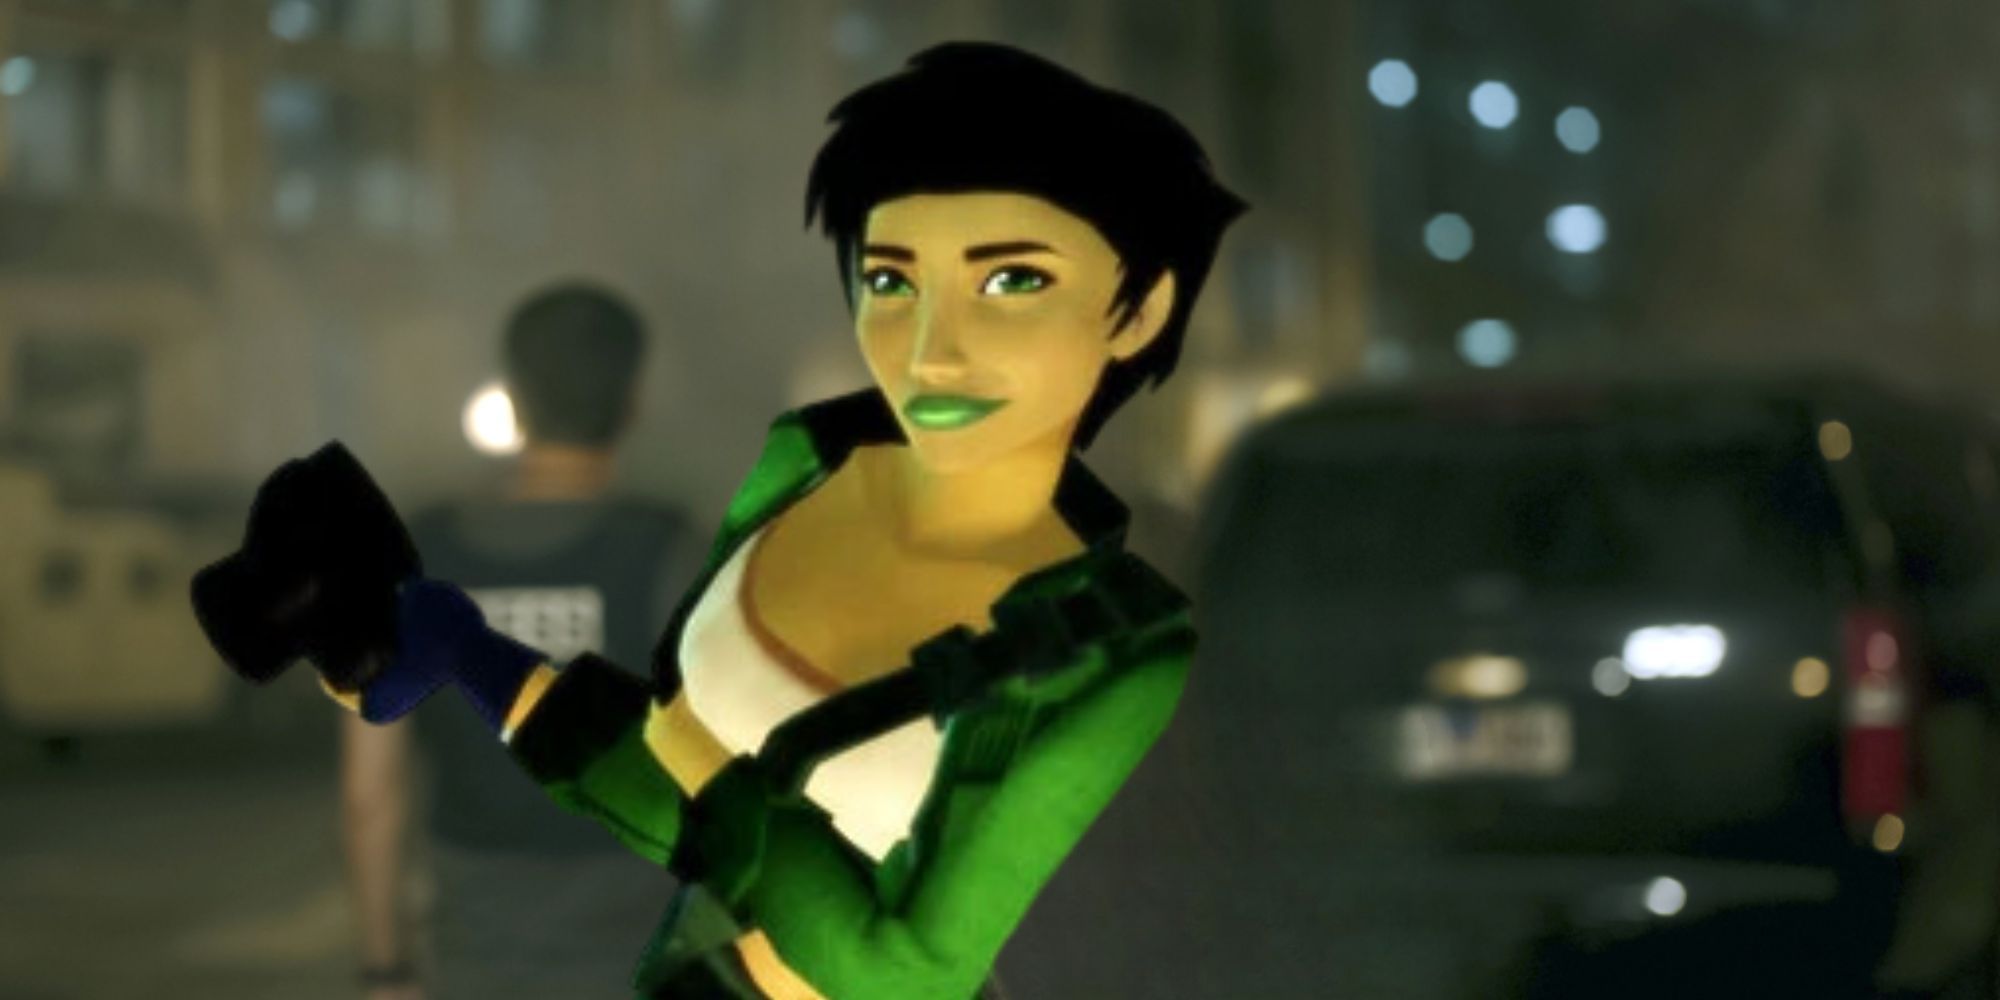 Jade from Beyond Good and Evil in a still from Alex Garland's Civil War